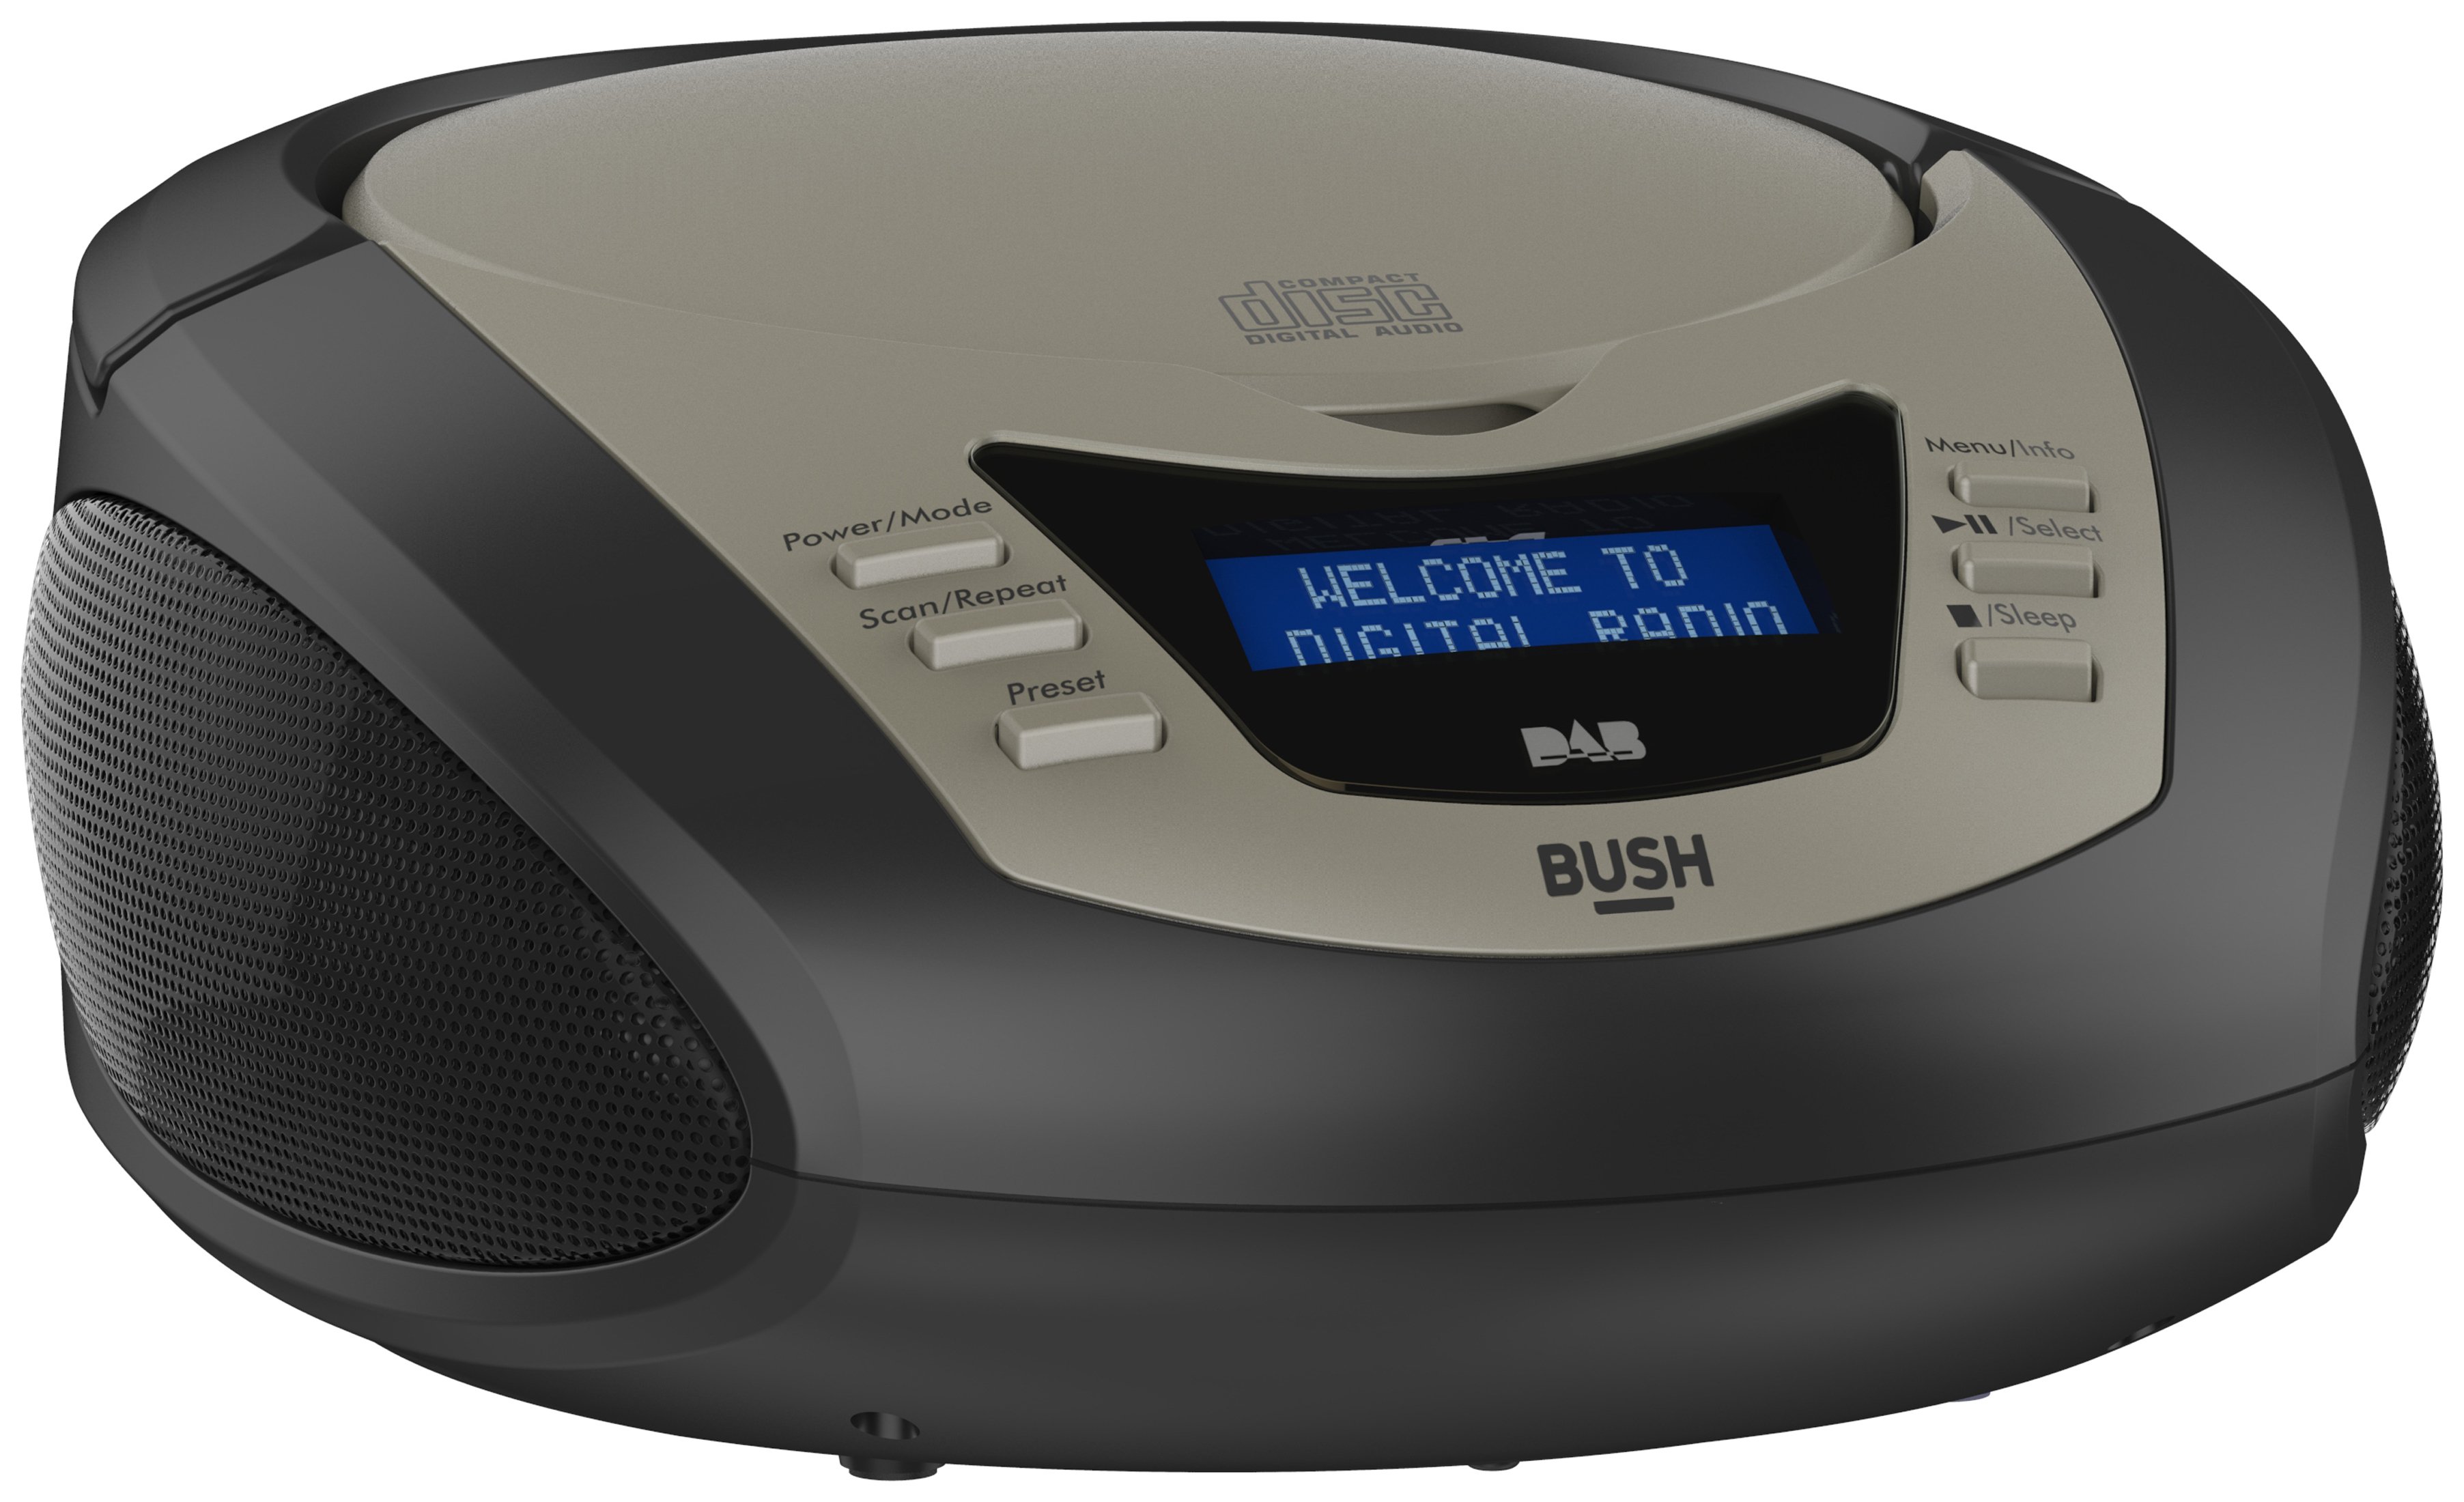 Bush DAB Boombox with CD Player Review